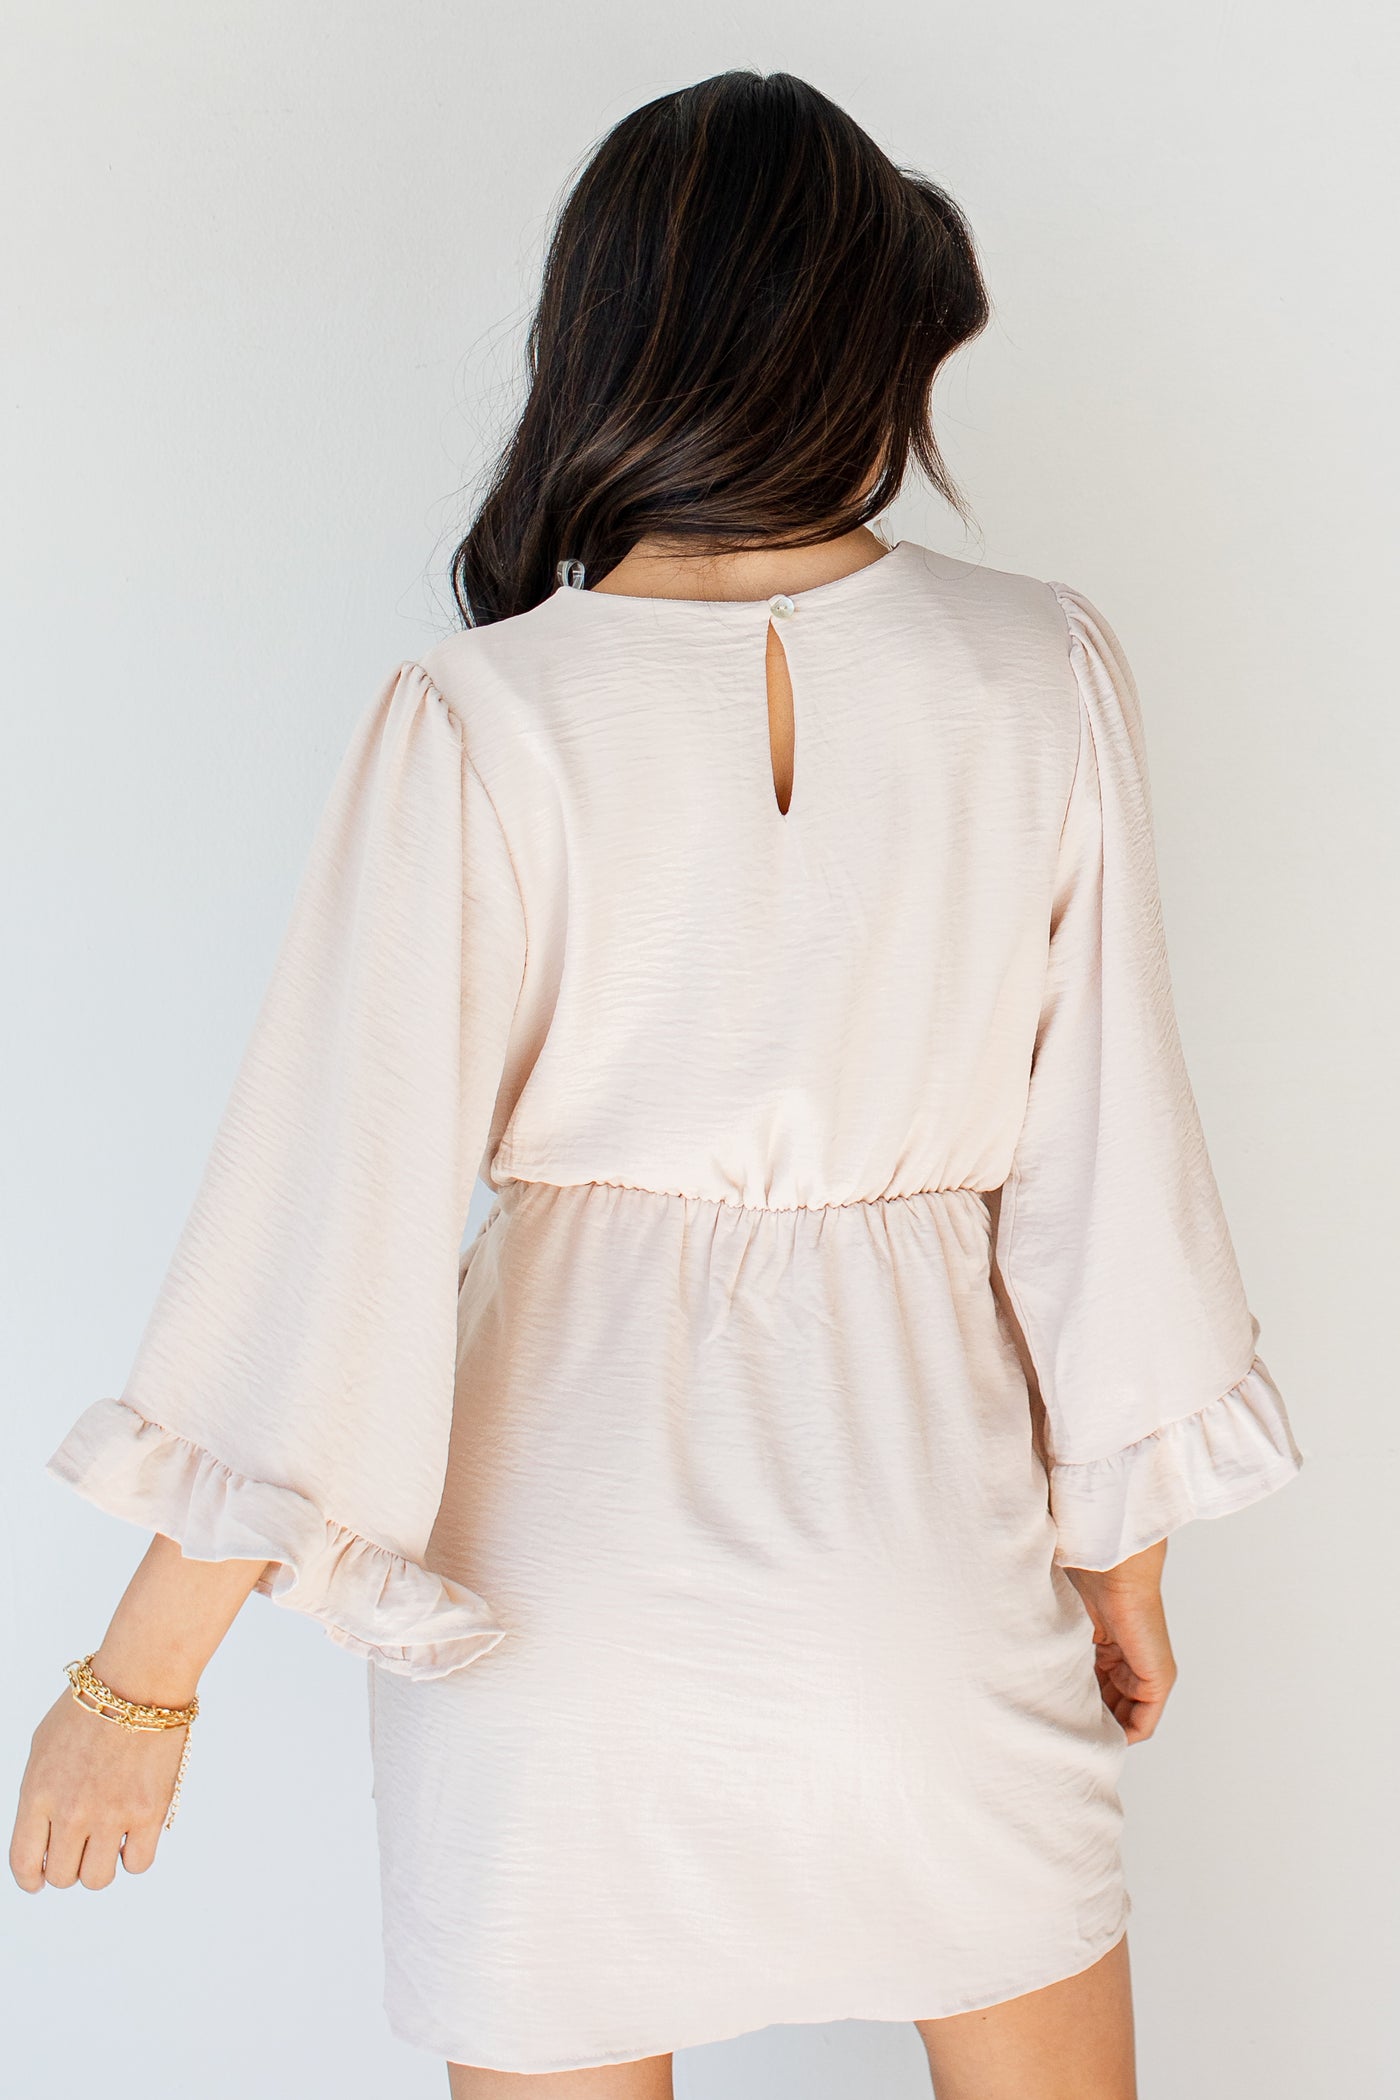 Wrap Dress in ivory back view